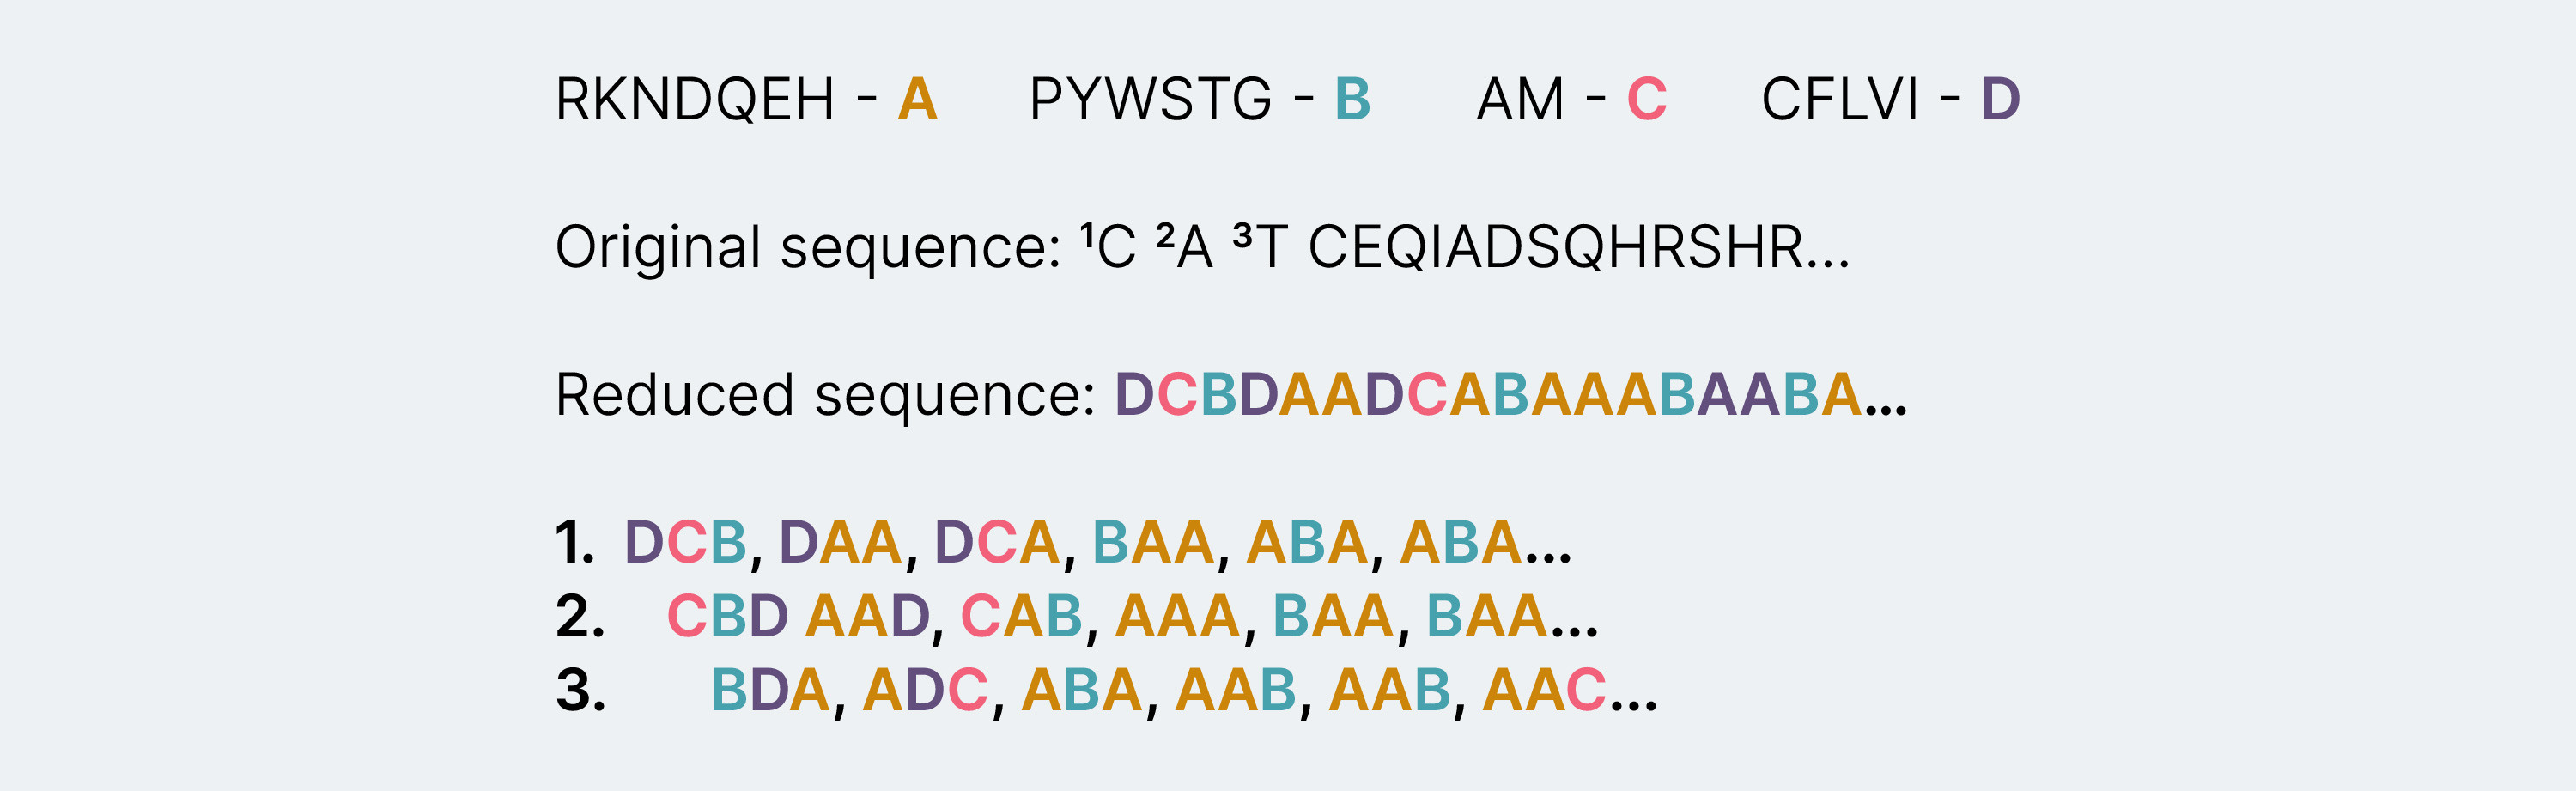 Reduced peptide sequence splitting: Based on the hydropathy index of each of the amino acids they are grouped into A, B, C and D groups. “Original sequence” refers to an antimicrobial peptide which is then reduced to ABCD based on the hydropathy grouping forming the reduced sequence. 